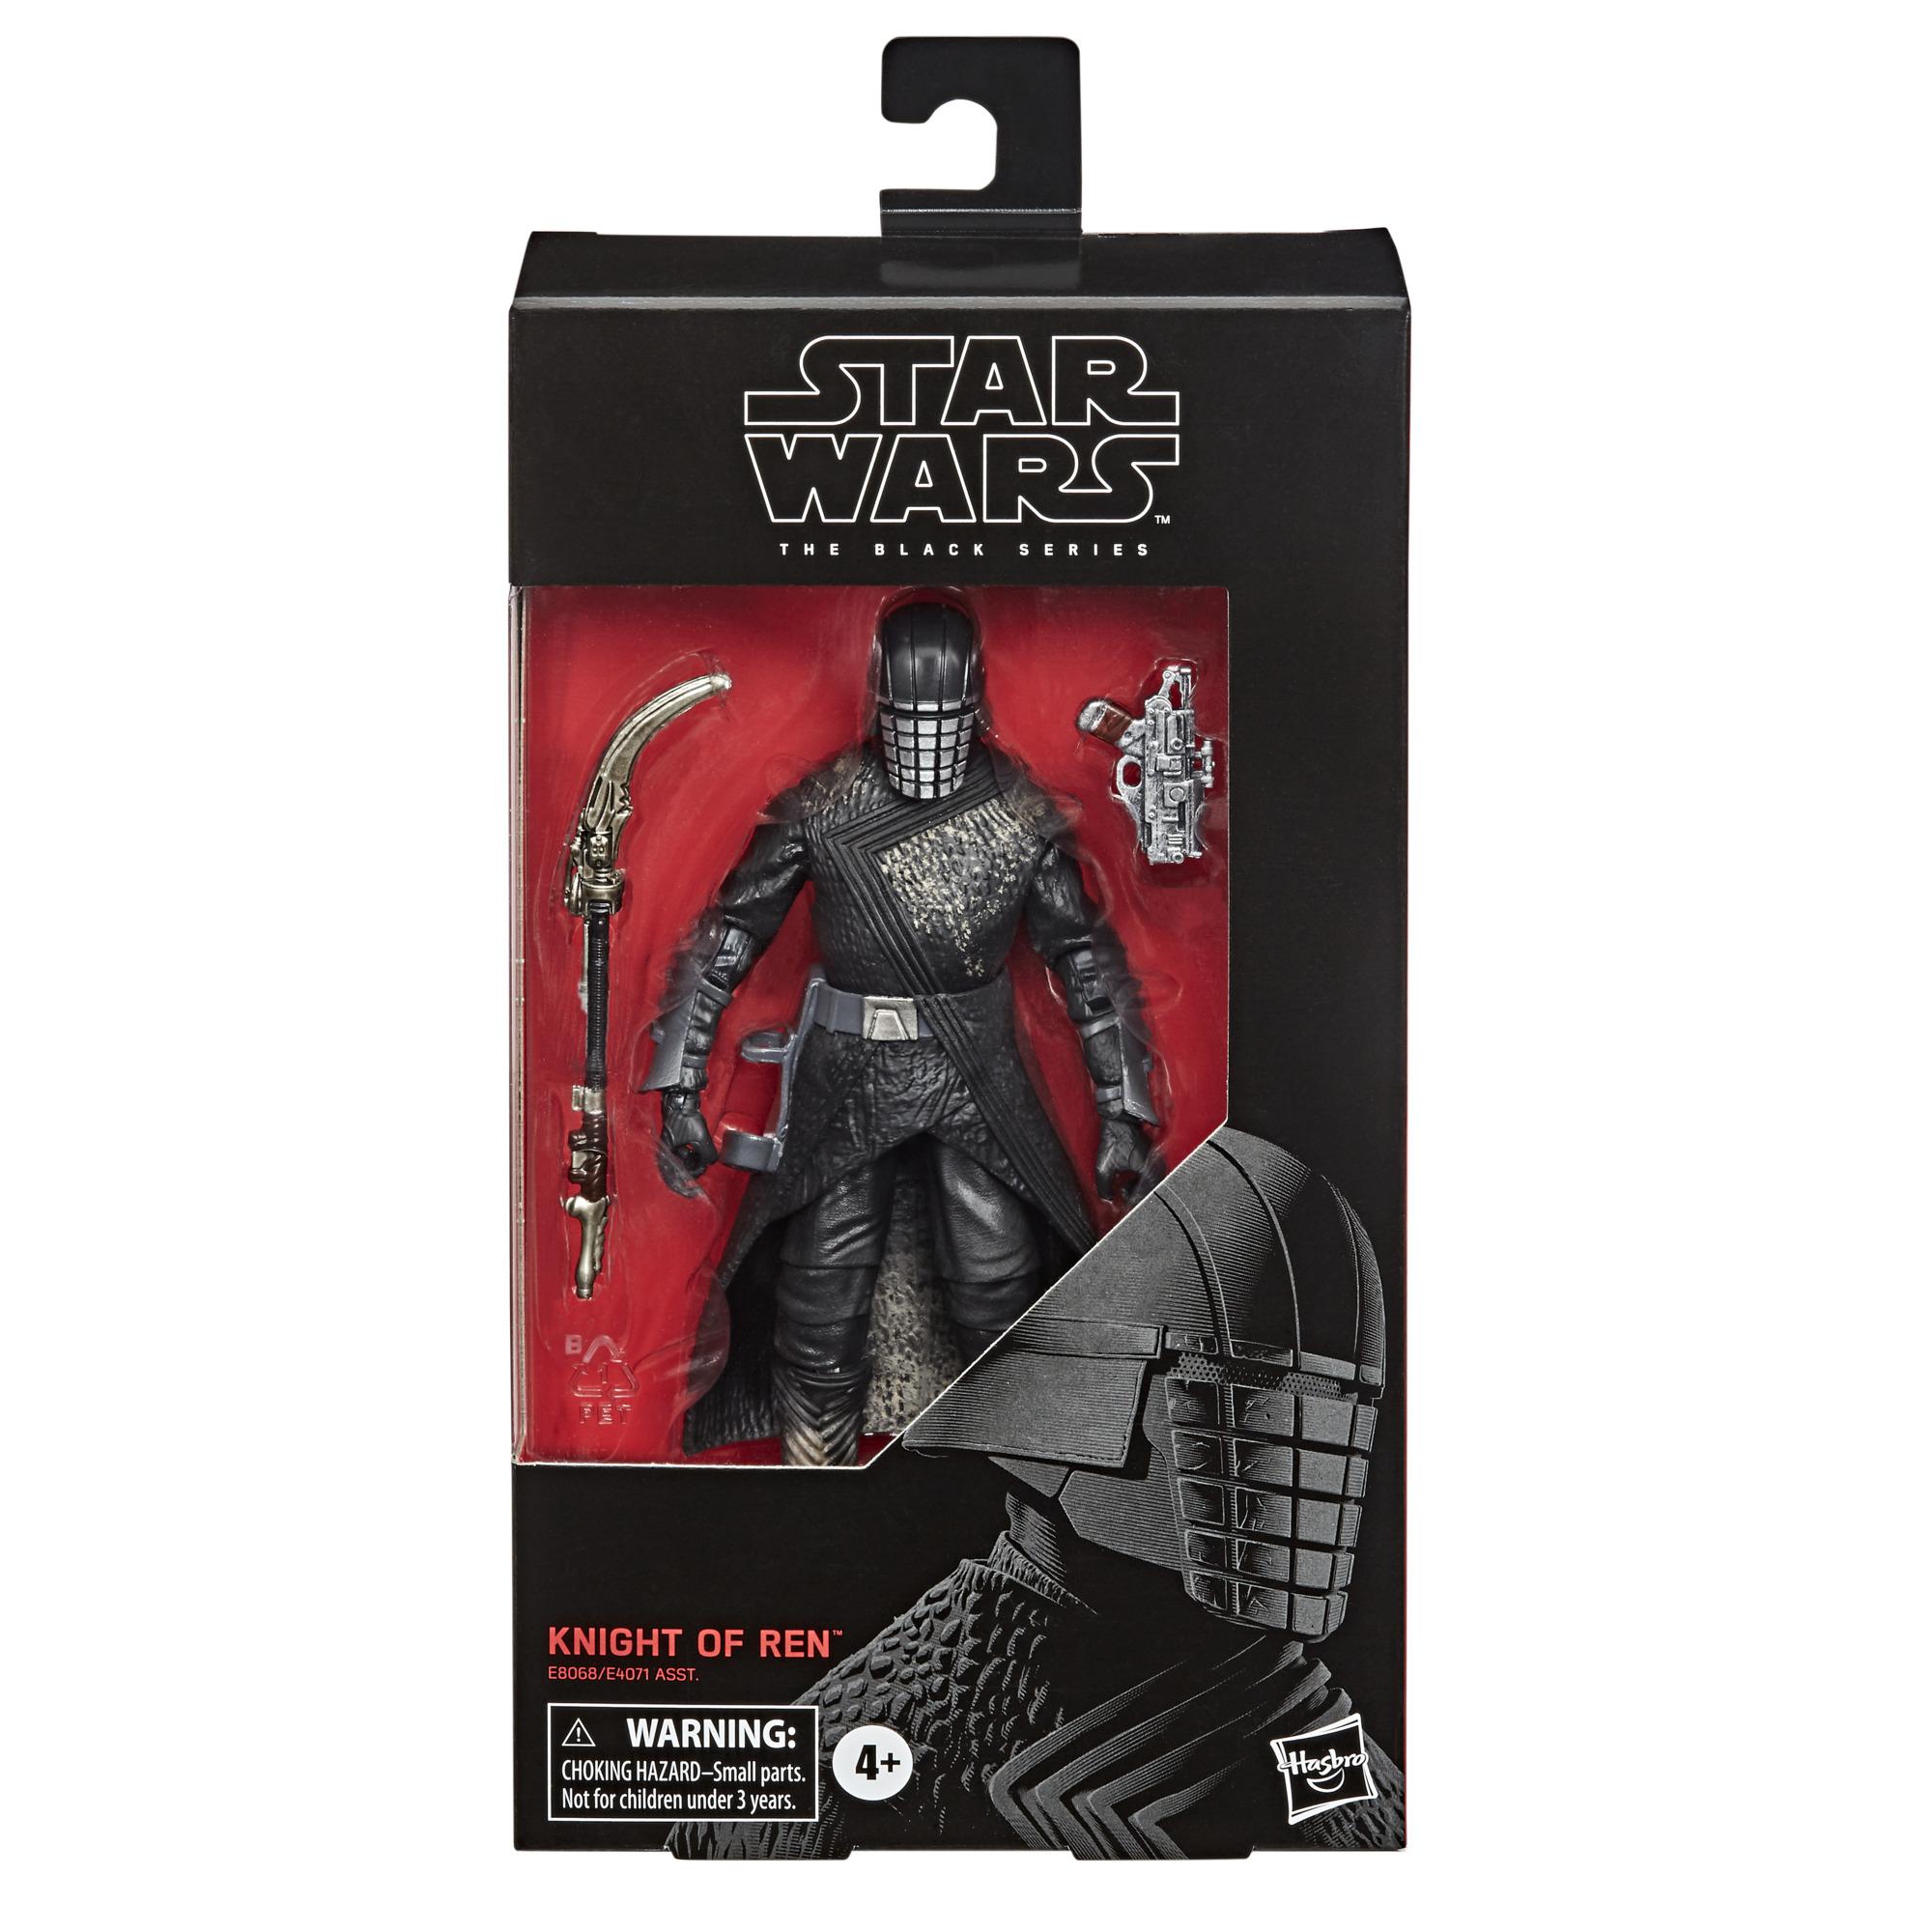 The Rise of Skywalker Collectible Action Figure for sale online Hasbro Star Wars The Black Series Knight of Ren Toy 6-inch Scale Star Wars 